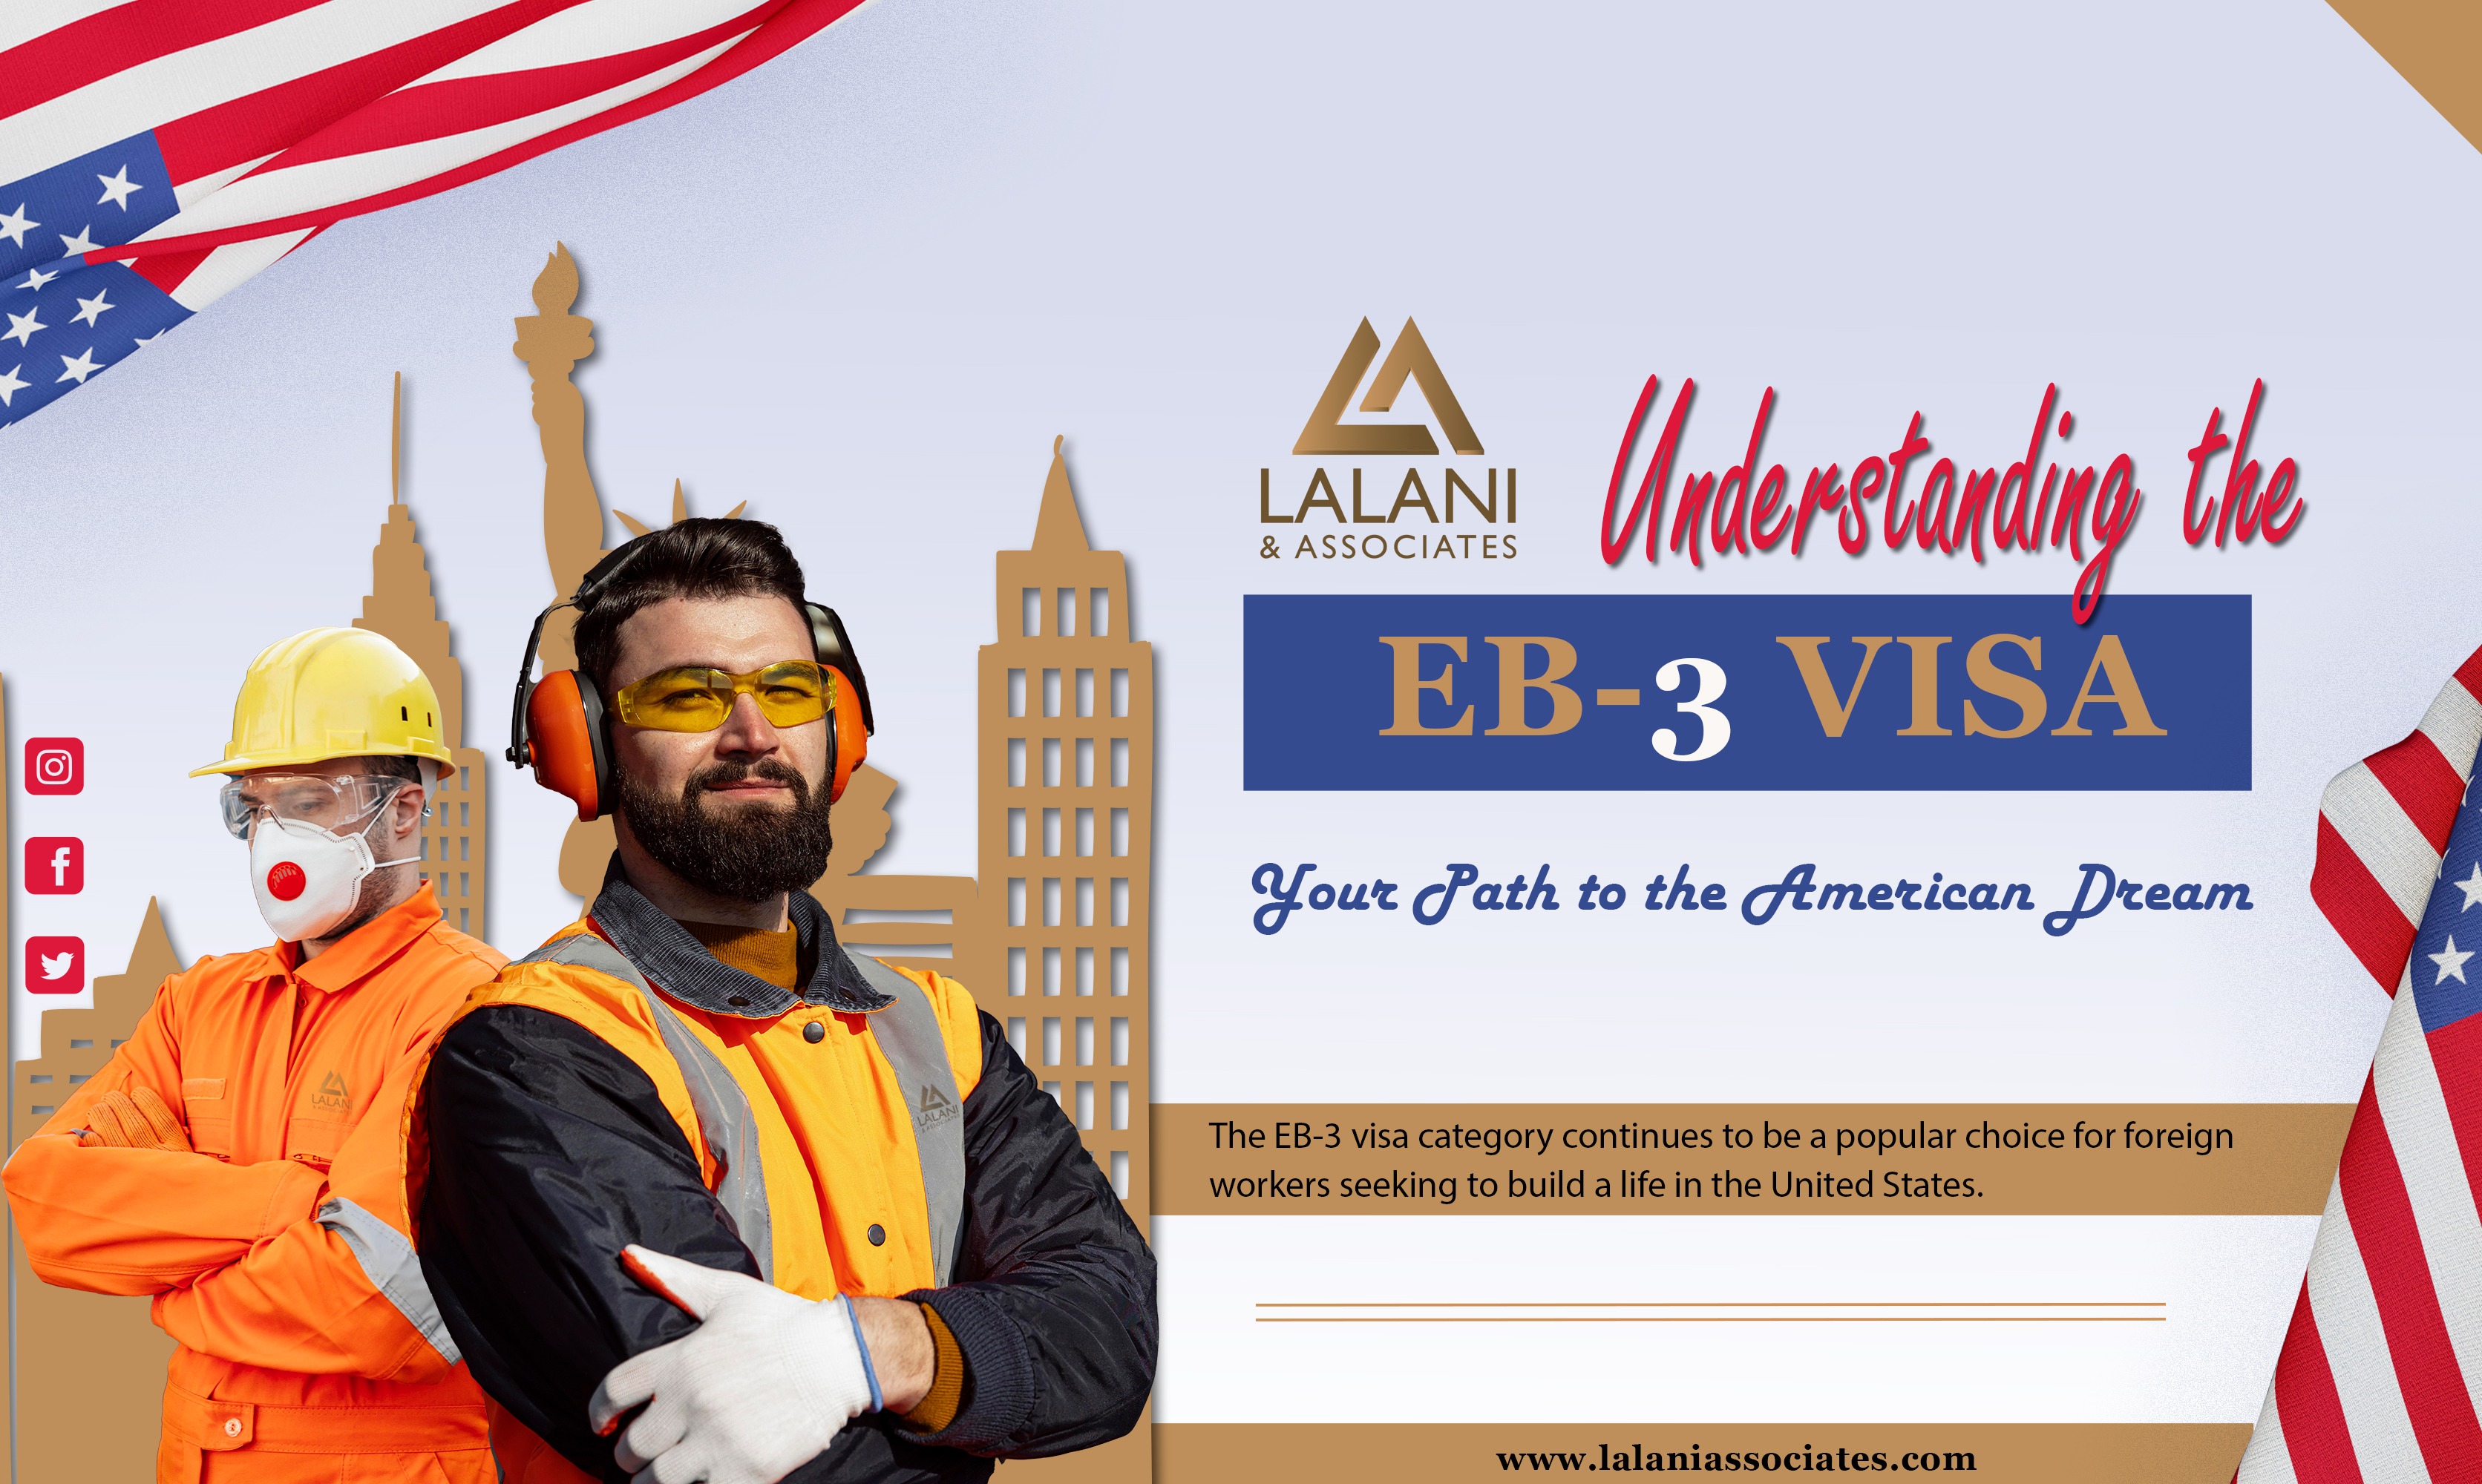 Understanding the EB-3 Visa: A Path to the American Dream for Unskilled Workers